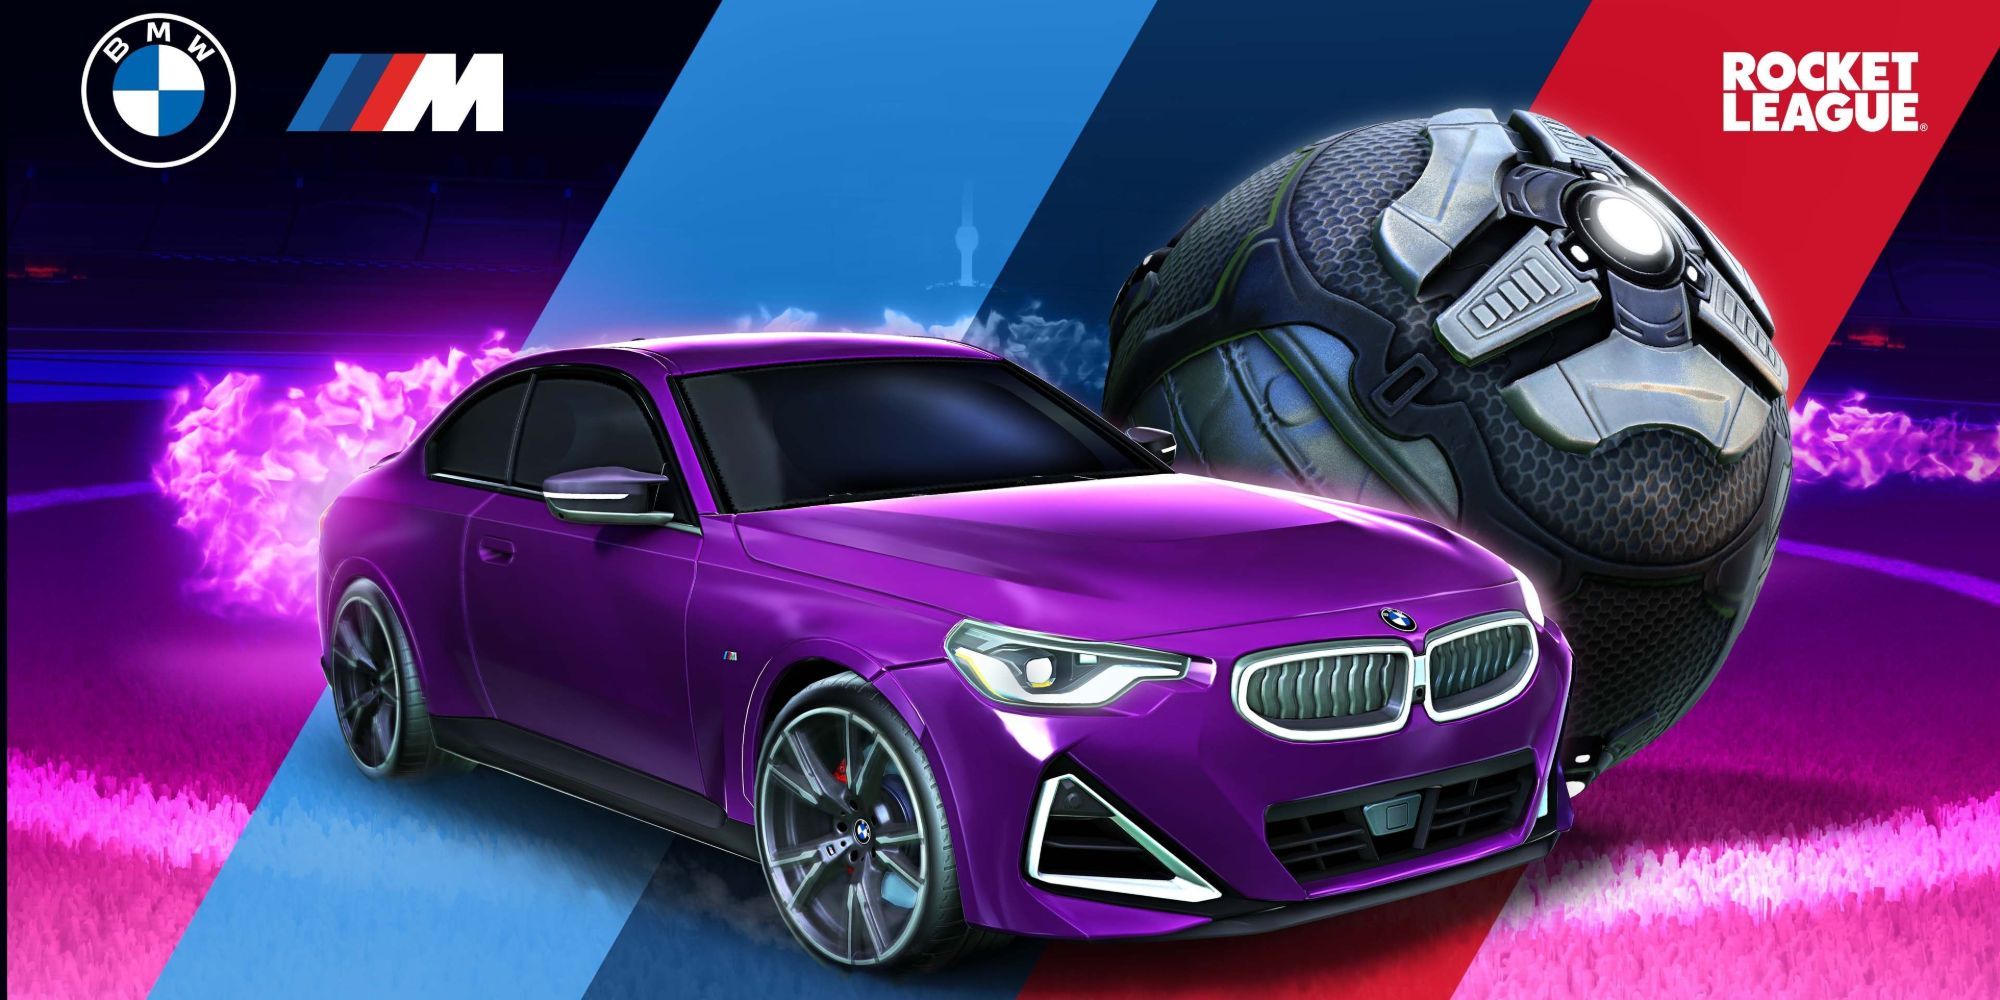 You Can Buy The Expensive BMW M240i For Just 11 In Rocket League